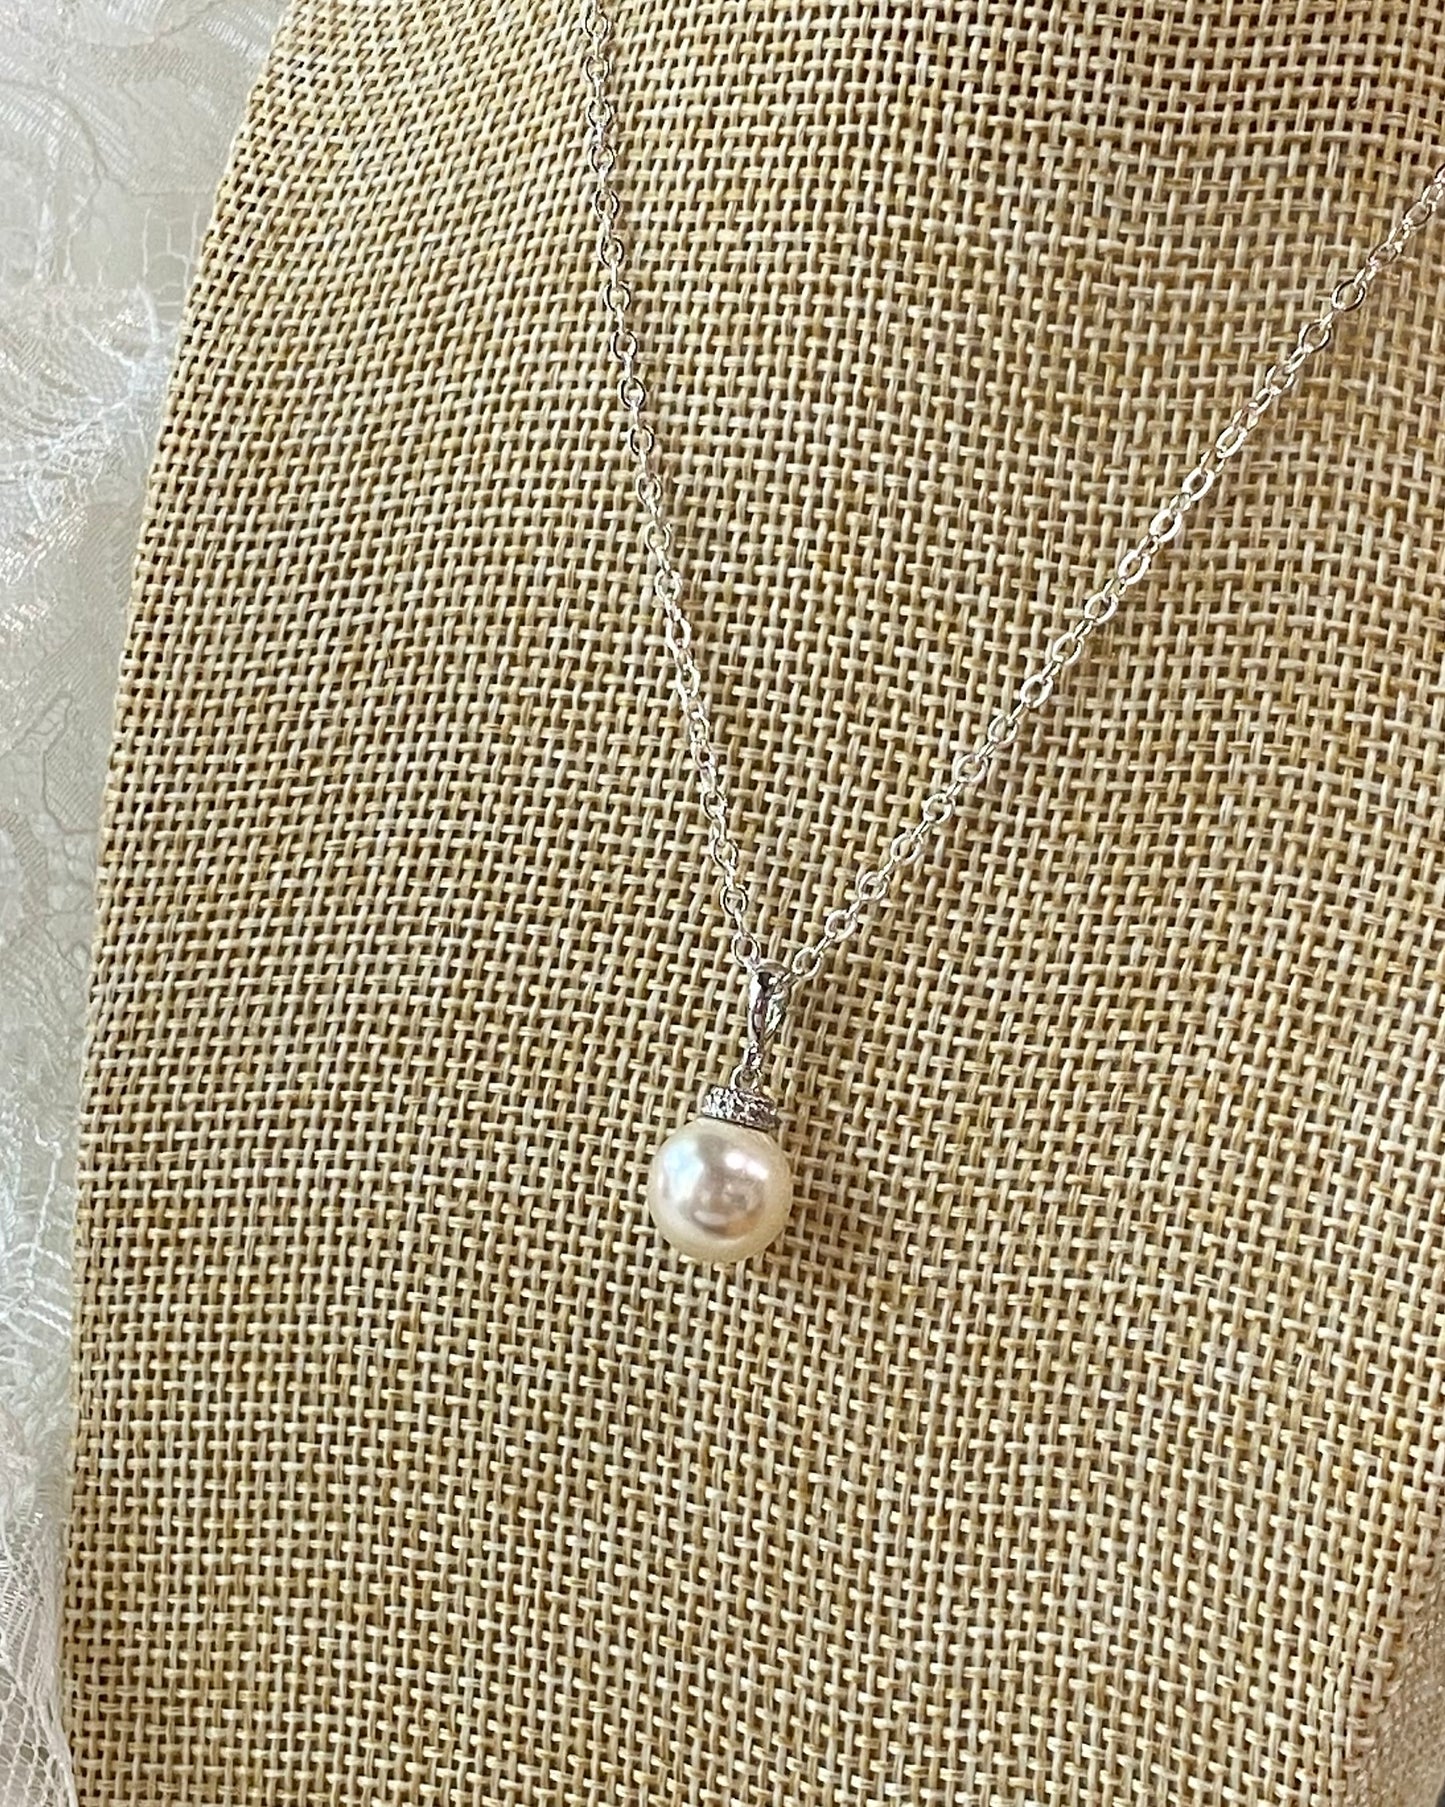 Lina Cream Pearl Necklace and Stud Earrings Set